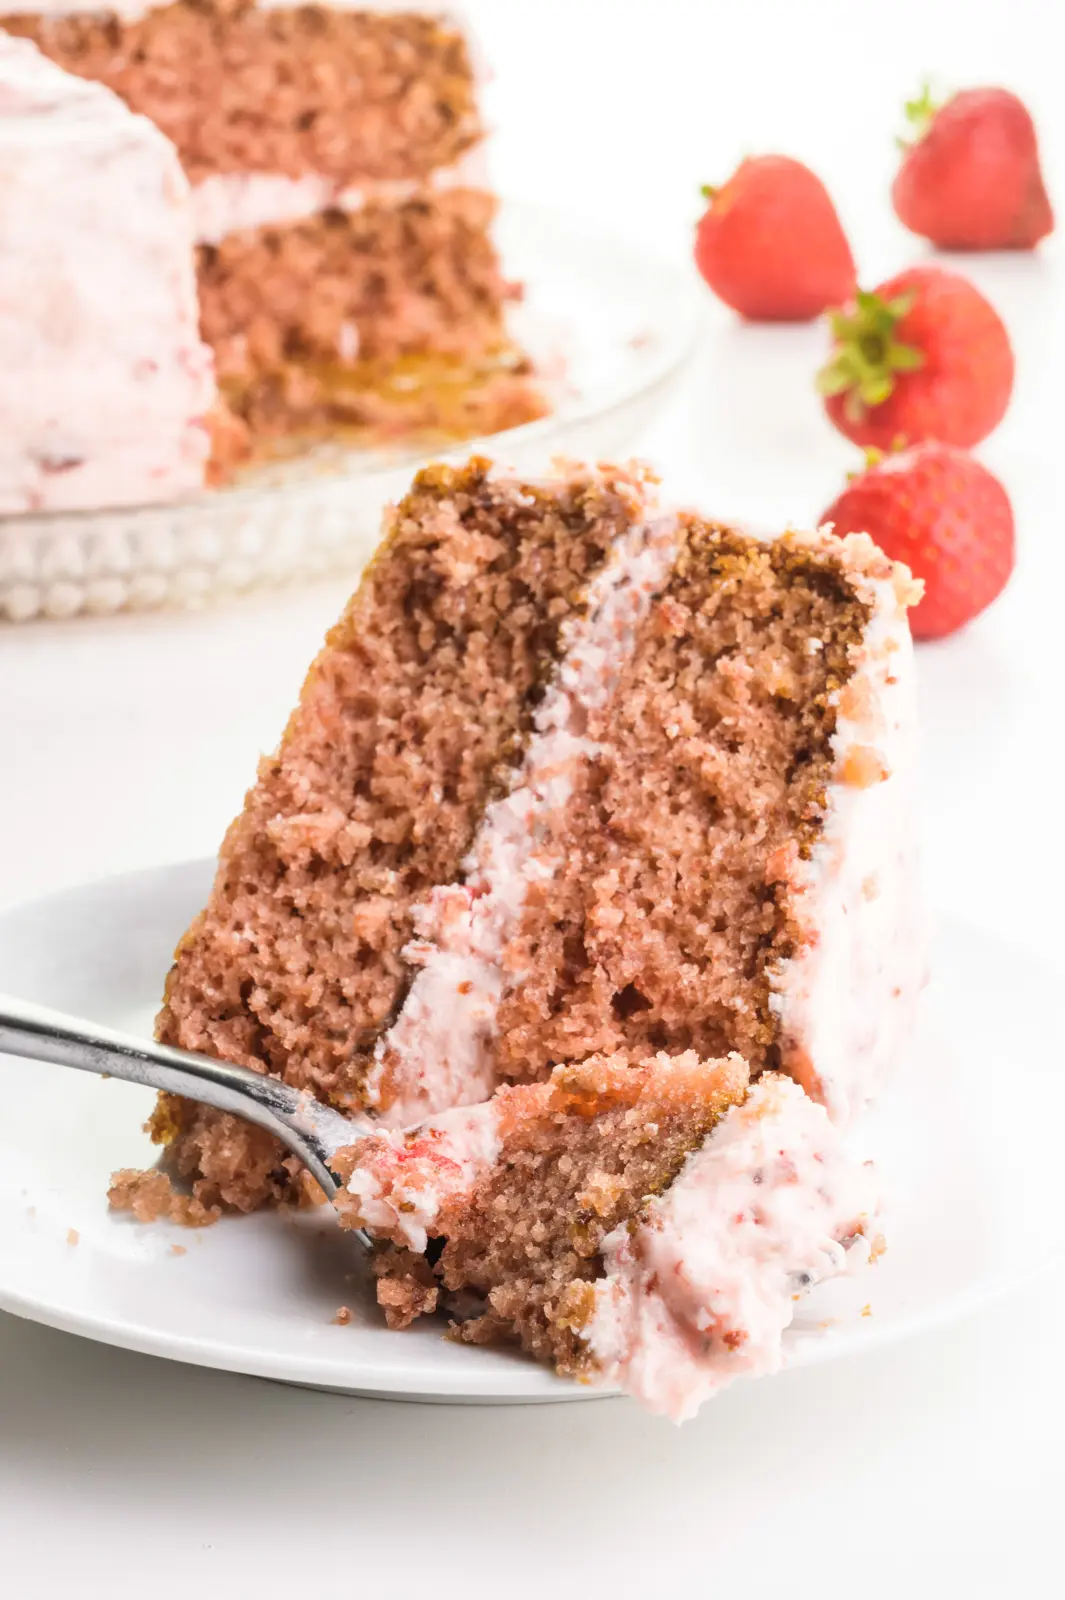 A layered slice of strawberry cake is sitting on a plate with a fork holding a bite. There are fresh strawberries and the rest of the cake behind it.